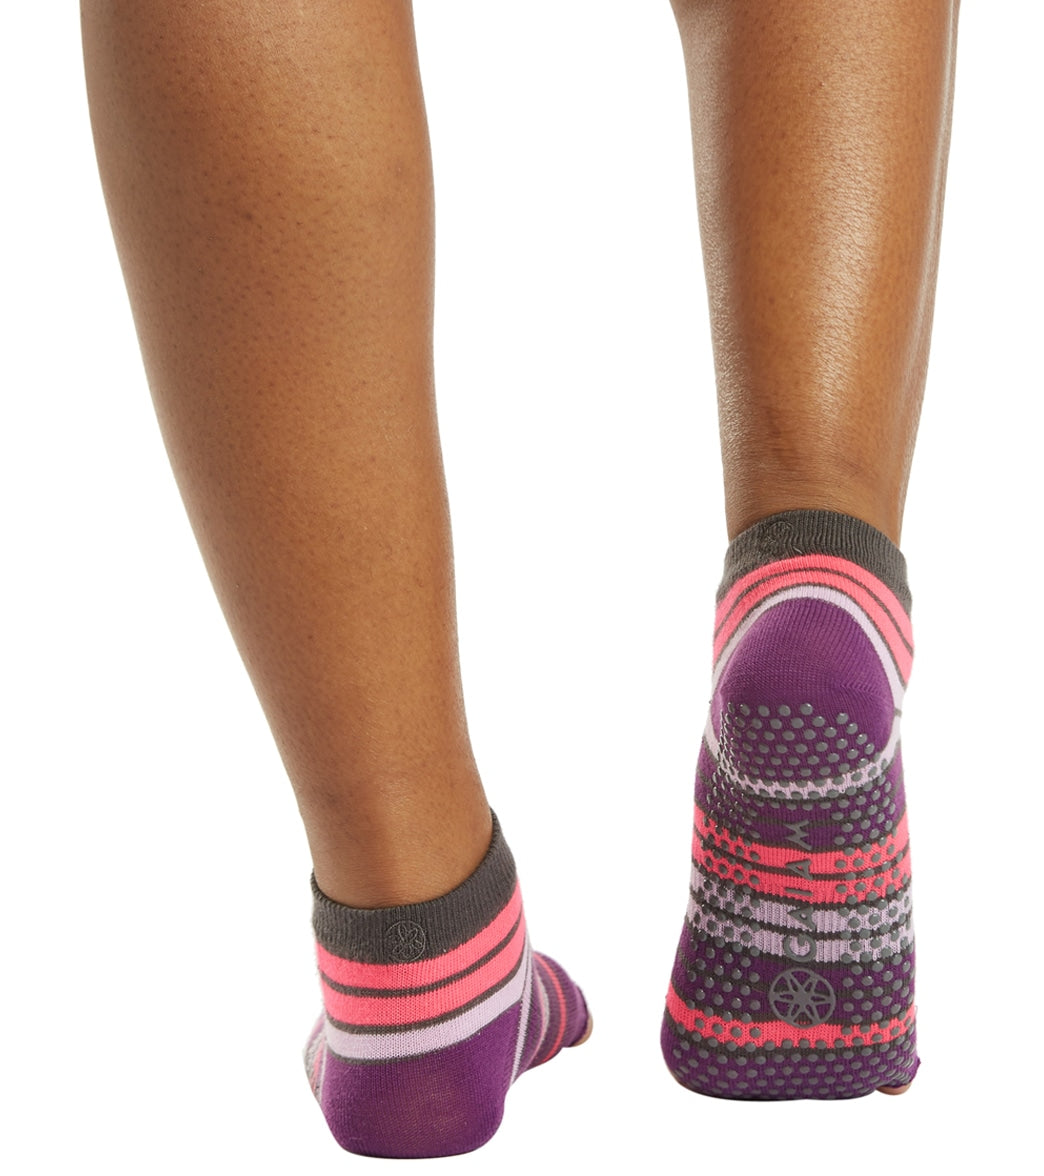 Gaiam Toeless Yoga Socks S/M (1 pair), Delivery Near You